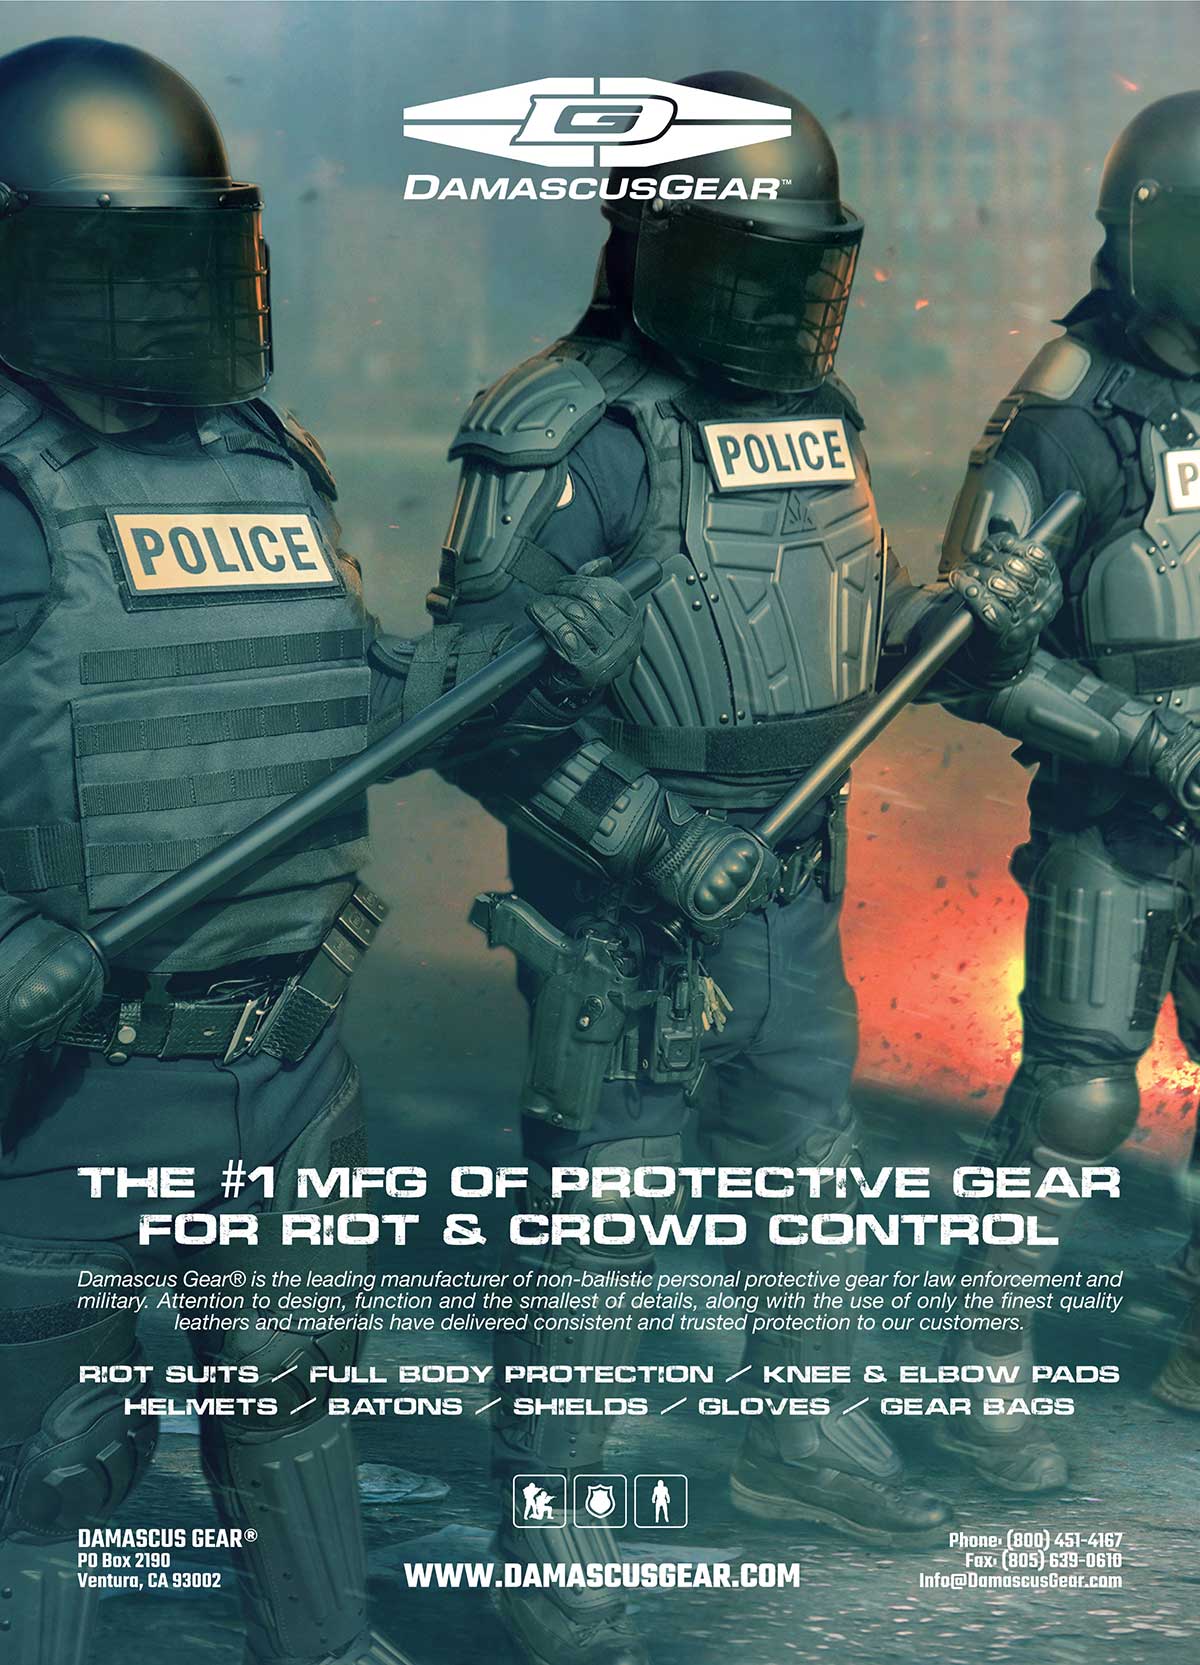 Damascus Gear is the leader in protective gear